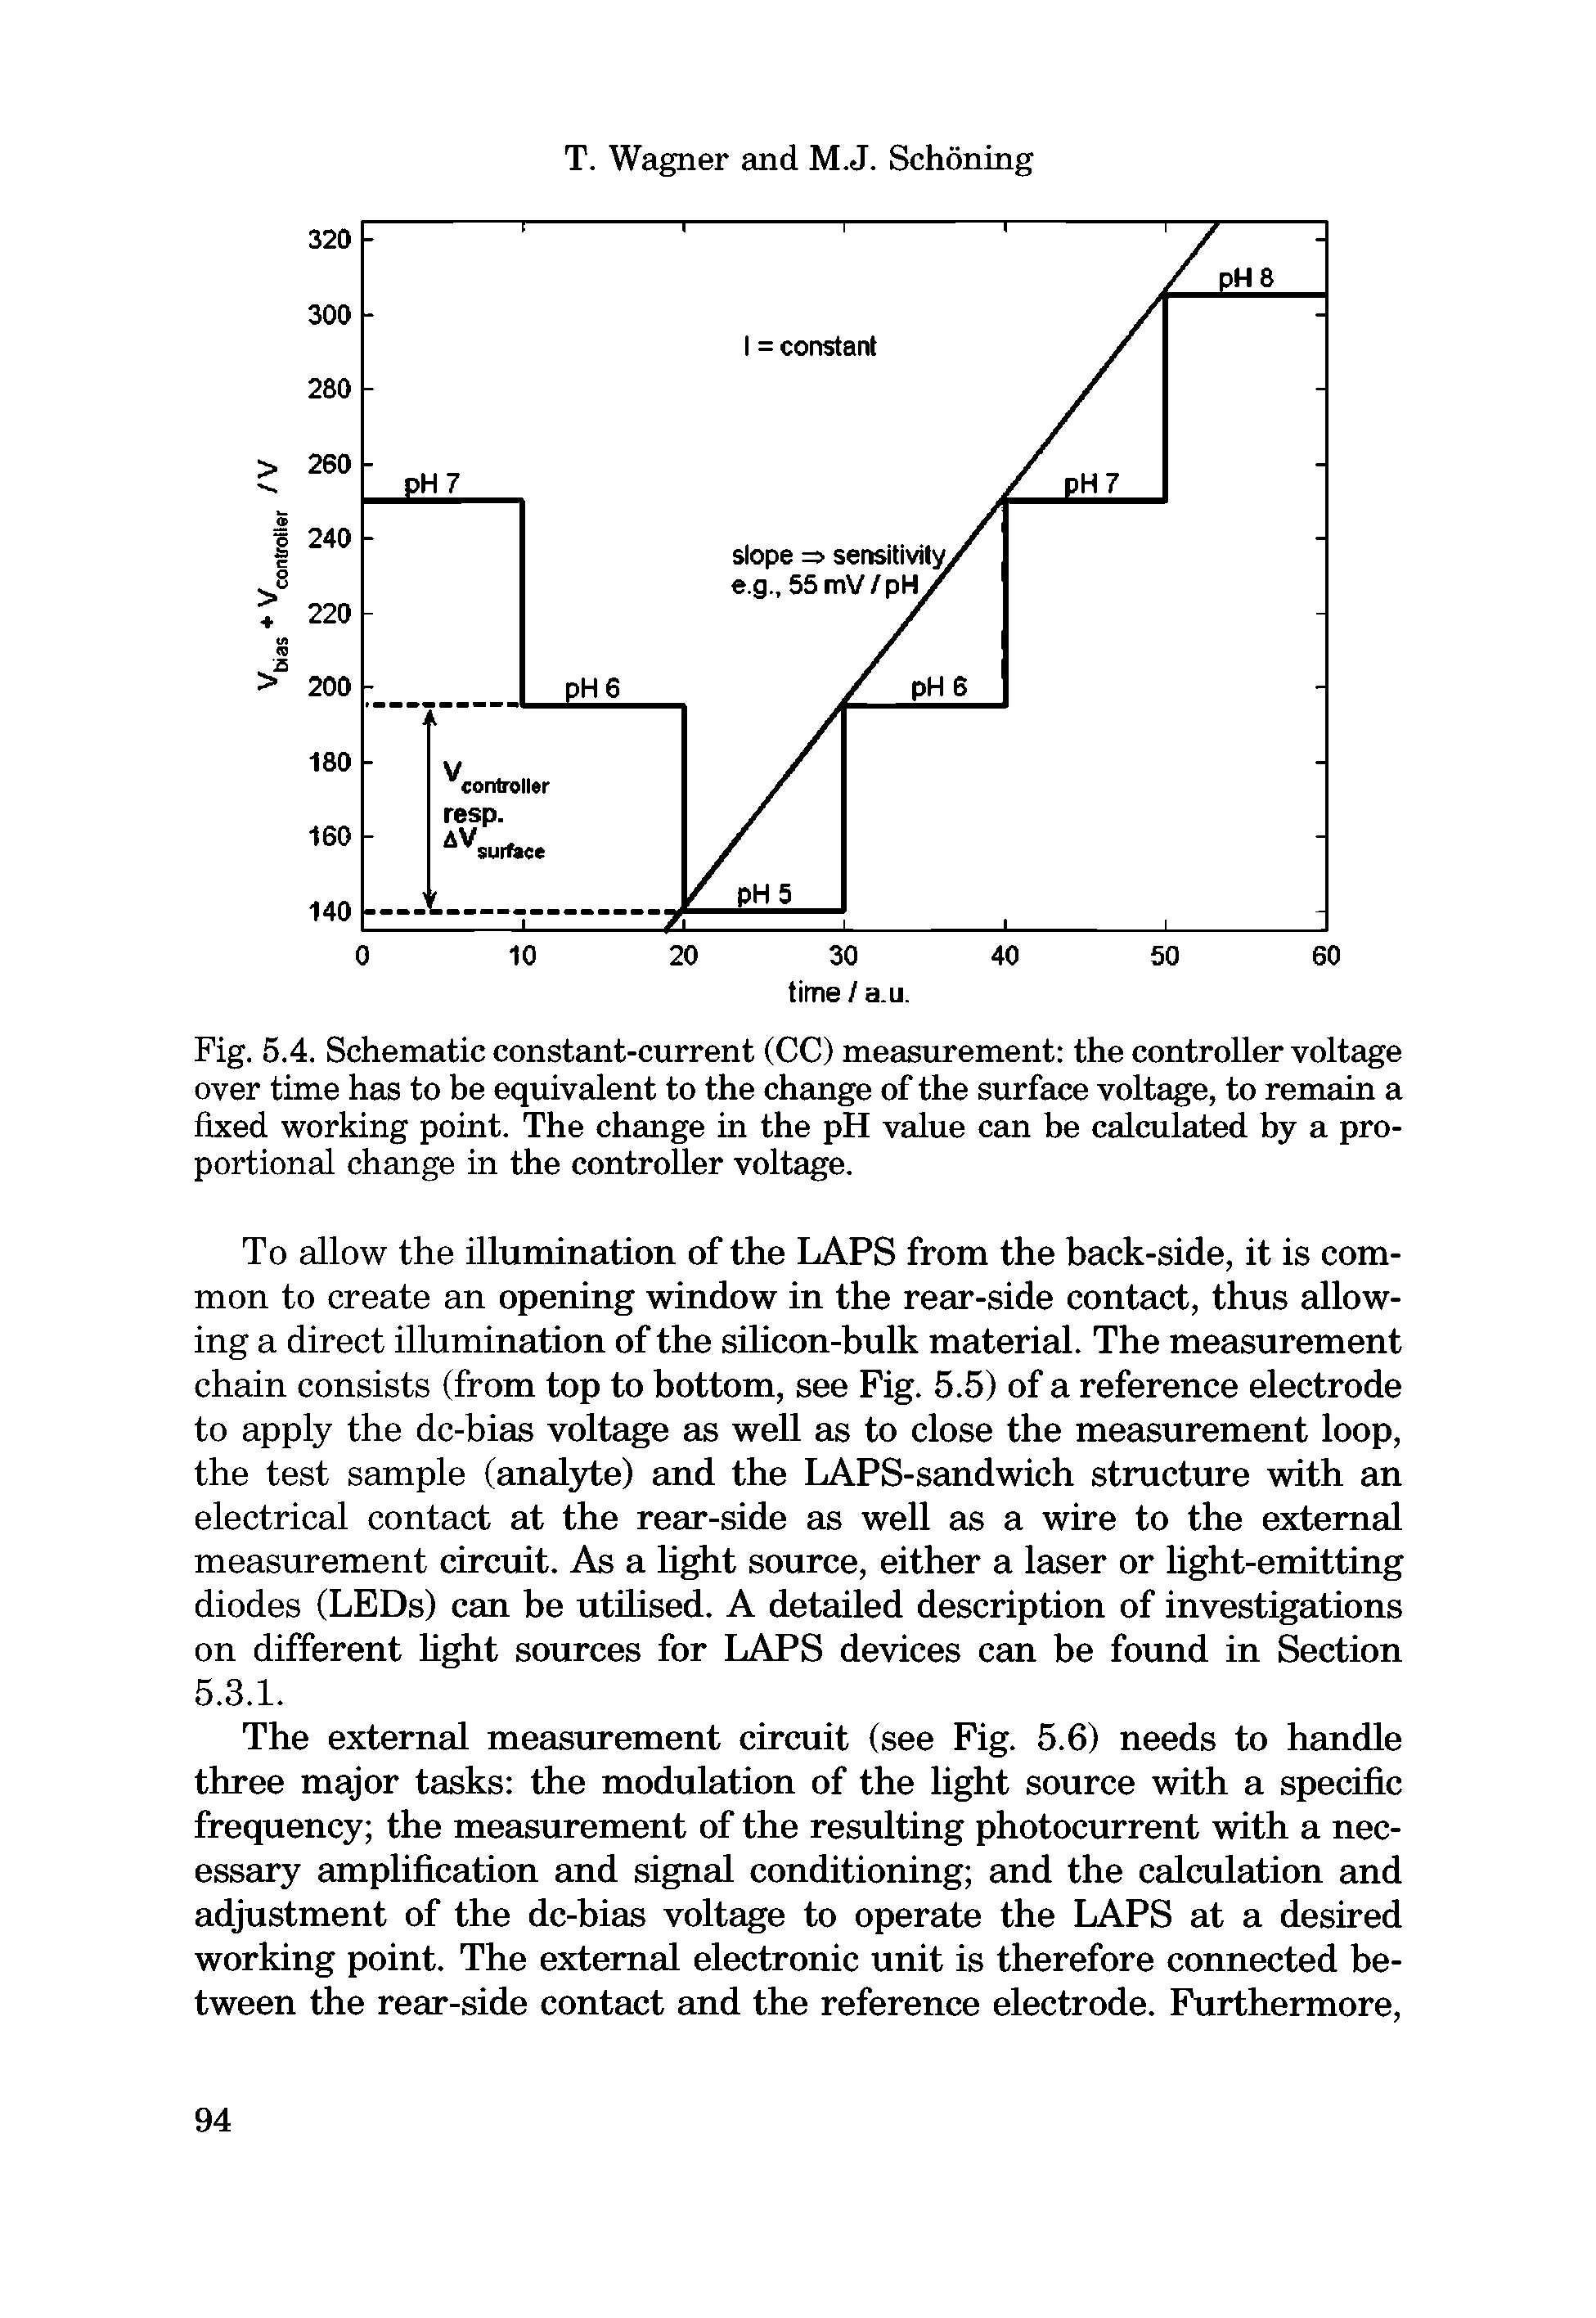 Fig. 5.4. Schematic constant-current (CC) measurement the controller voltage over time has to be equivalent to the change of the surface voltage, to remain a fixed working point. The change in the pH value can be calculated by a proportional change in the controller voltage.